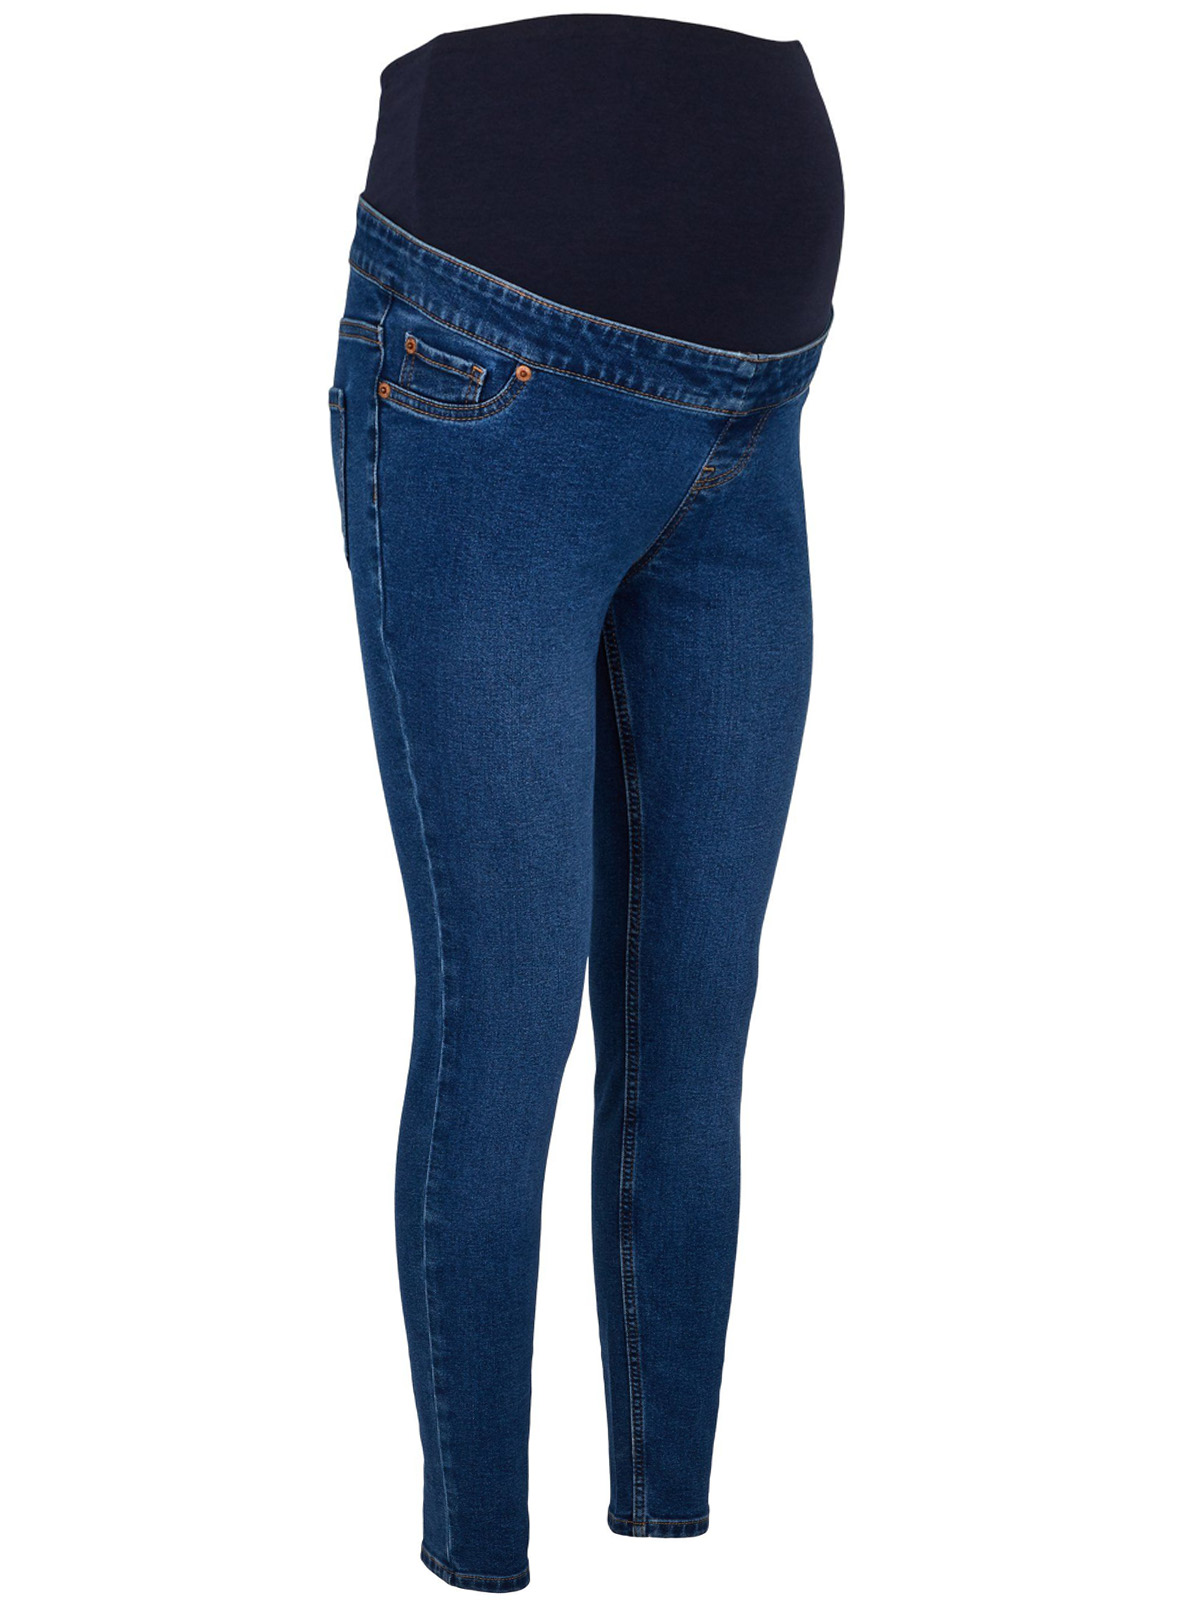 NEW L00K DENIM Over Bump Maternity Jeggings - Size 8 to 20